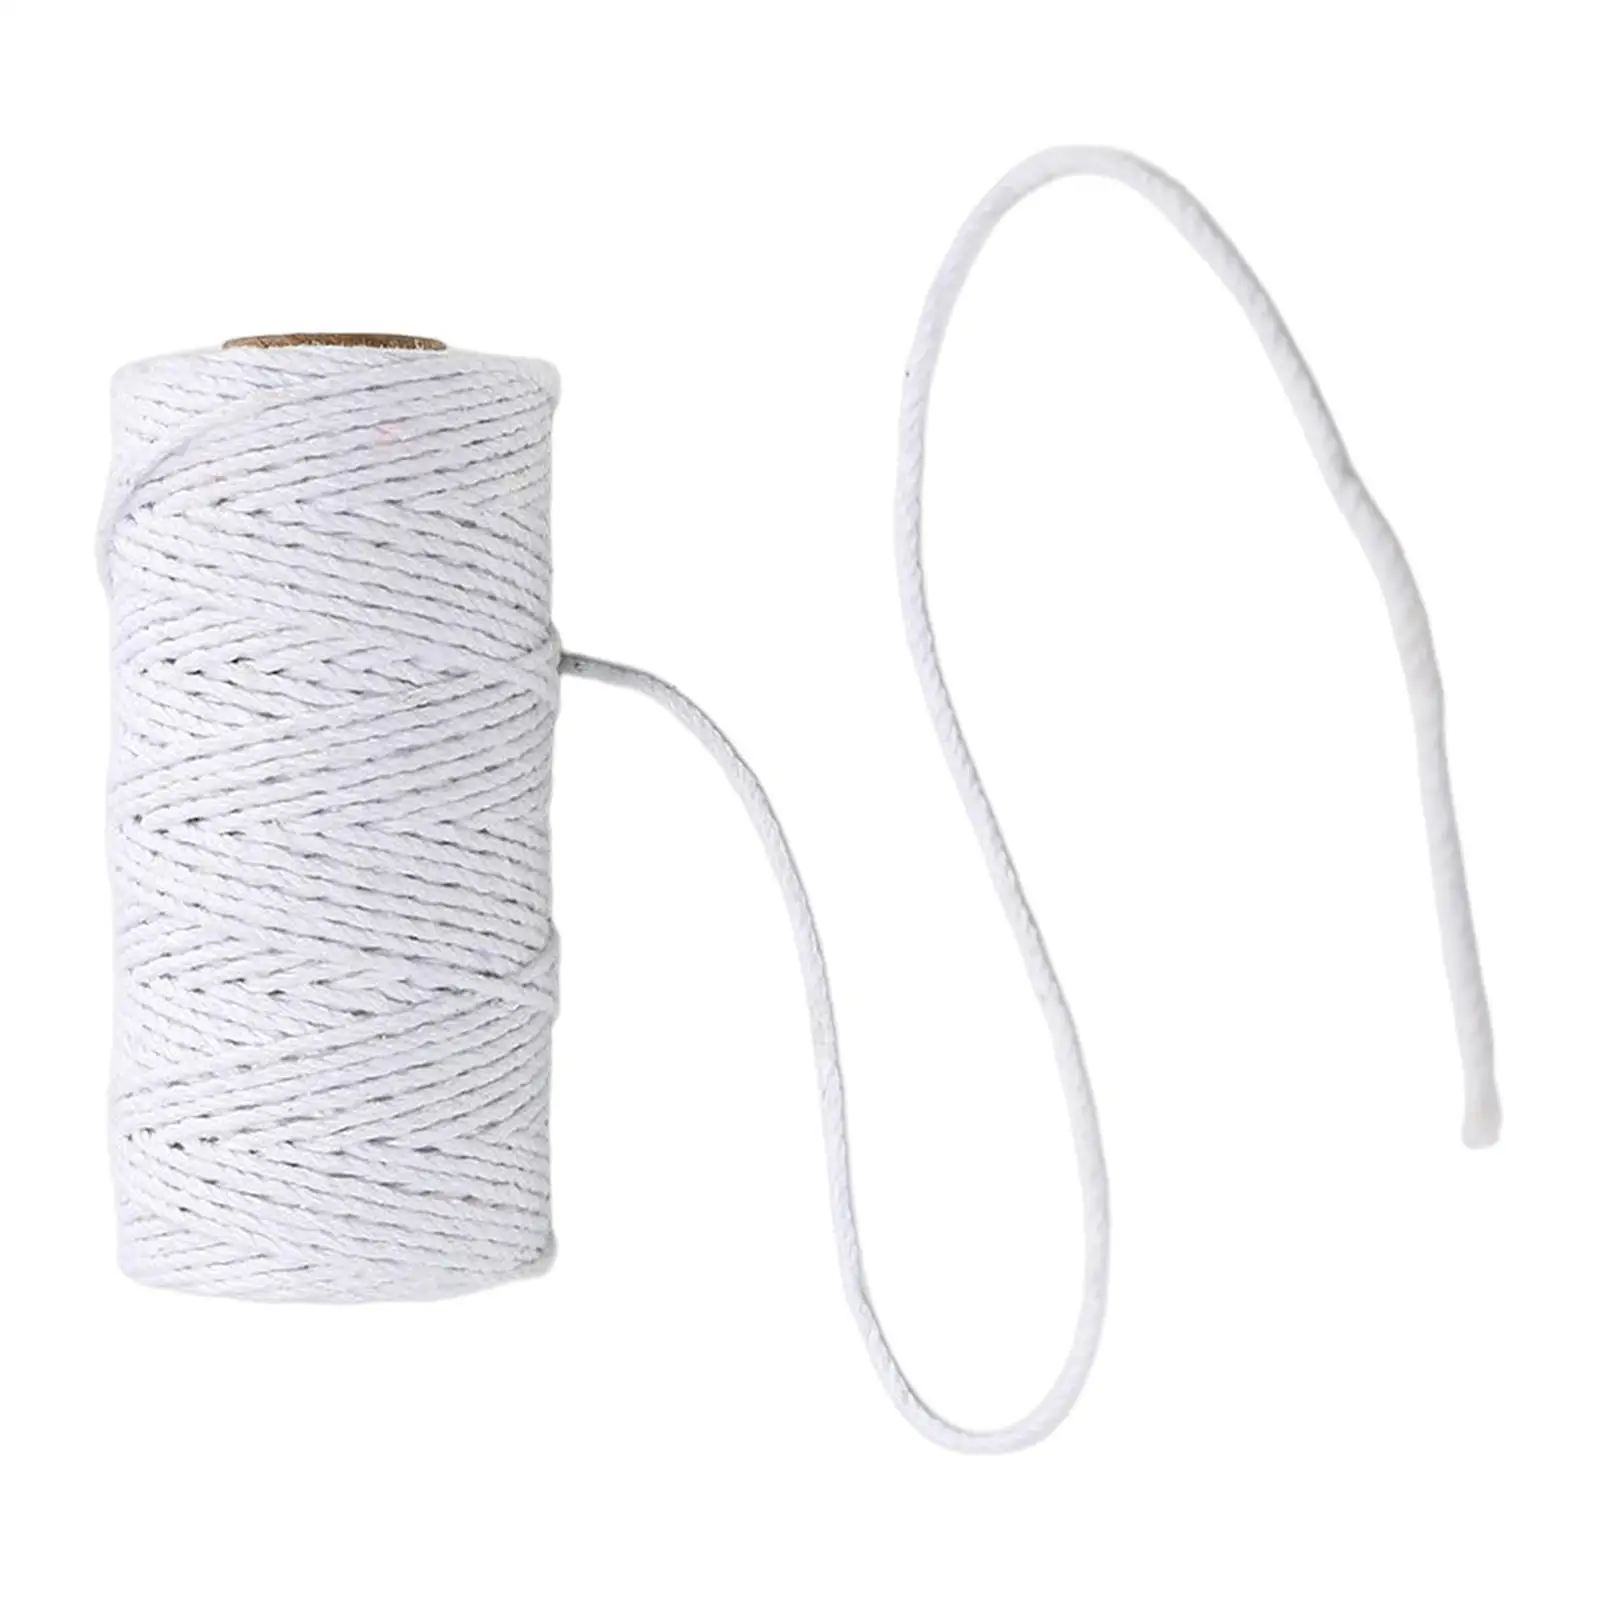 2mm 100 Meter Macrame Cord Packing String for Sewing Crafts DIY Home Bohemia Artworks